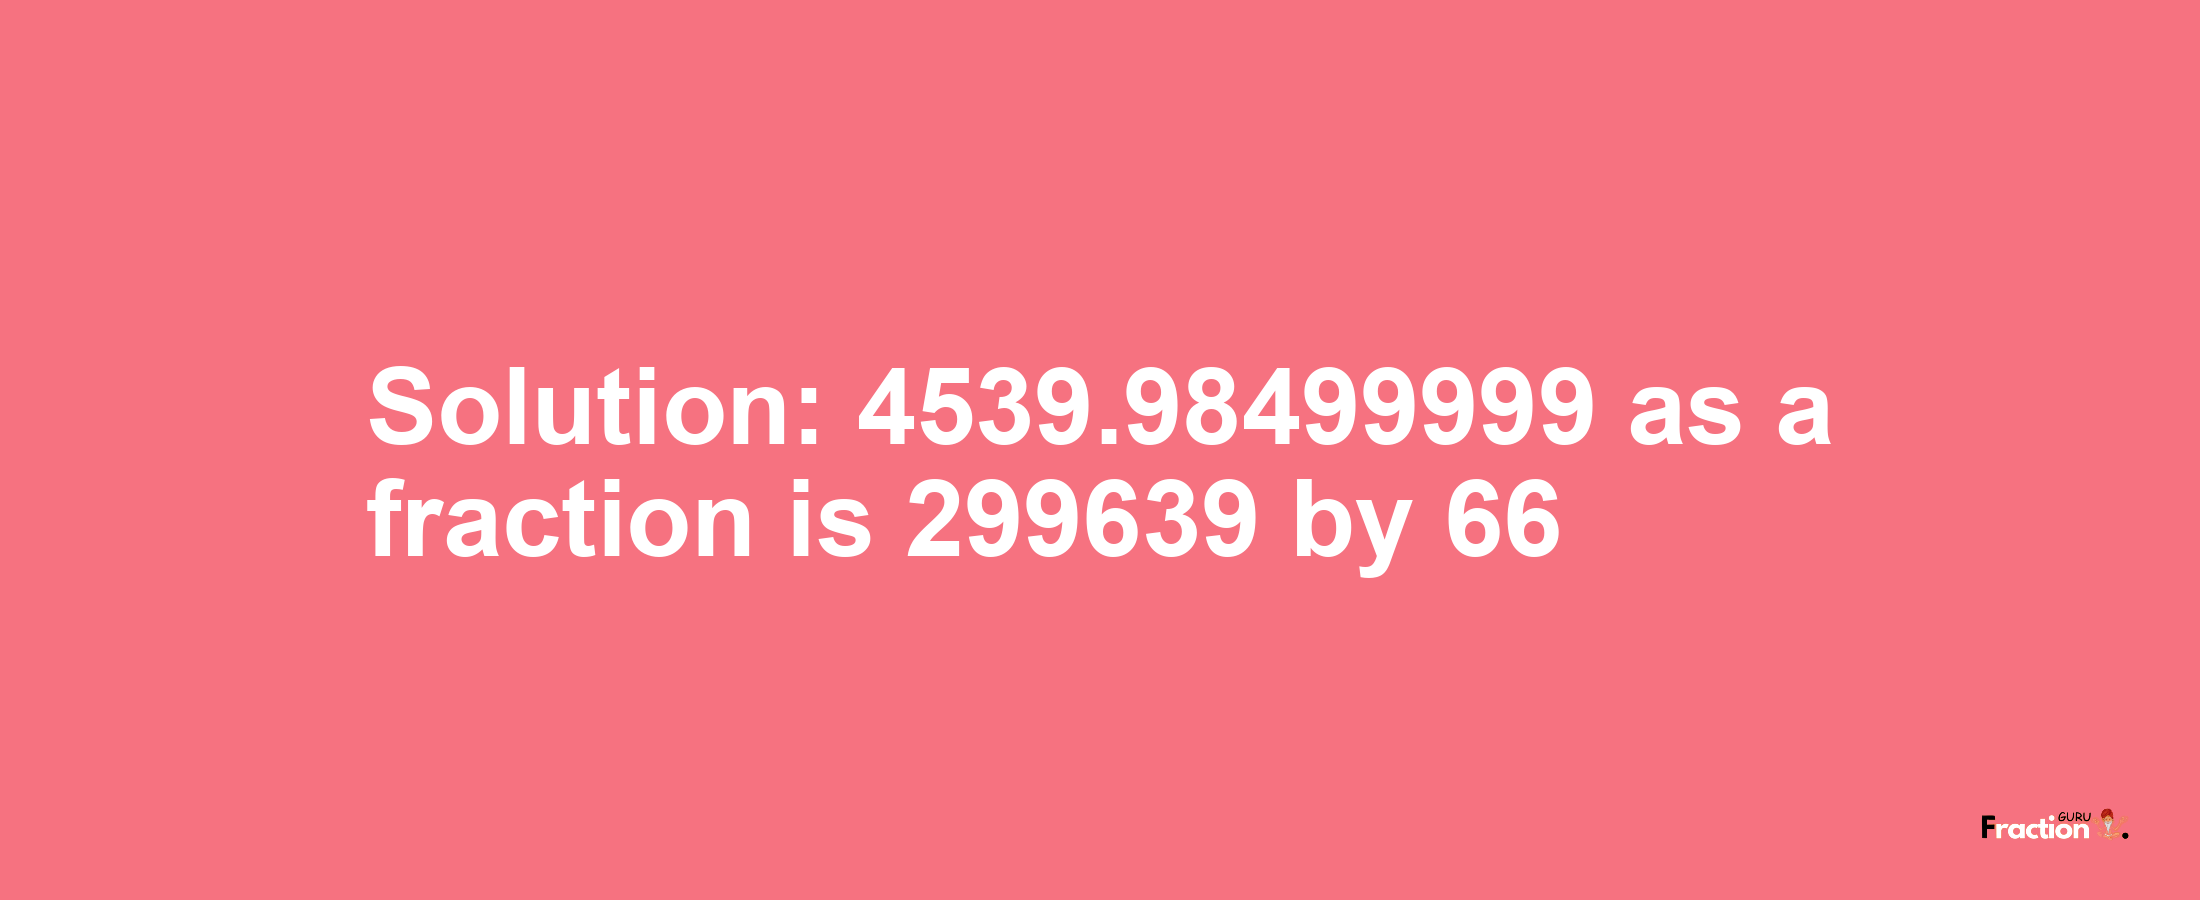 Solution:4539.98499999 as a fraction is 299639/66